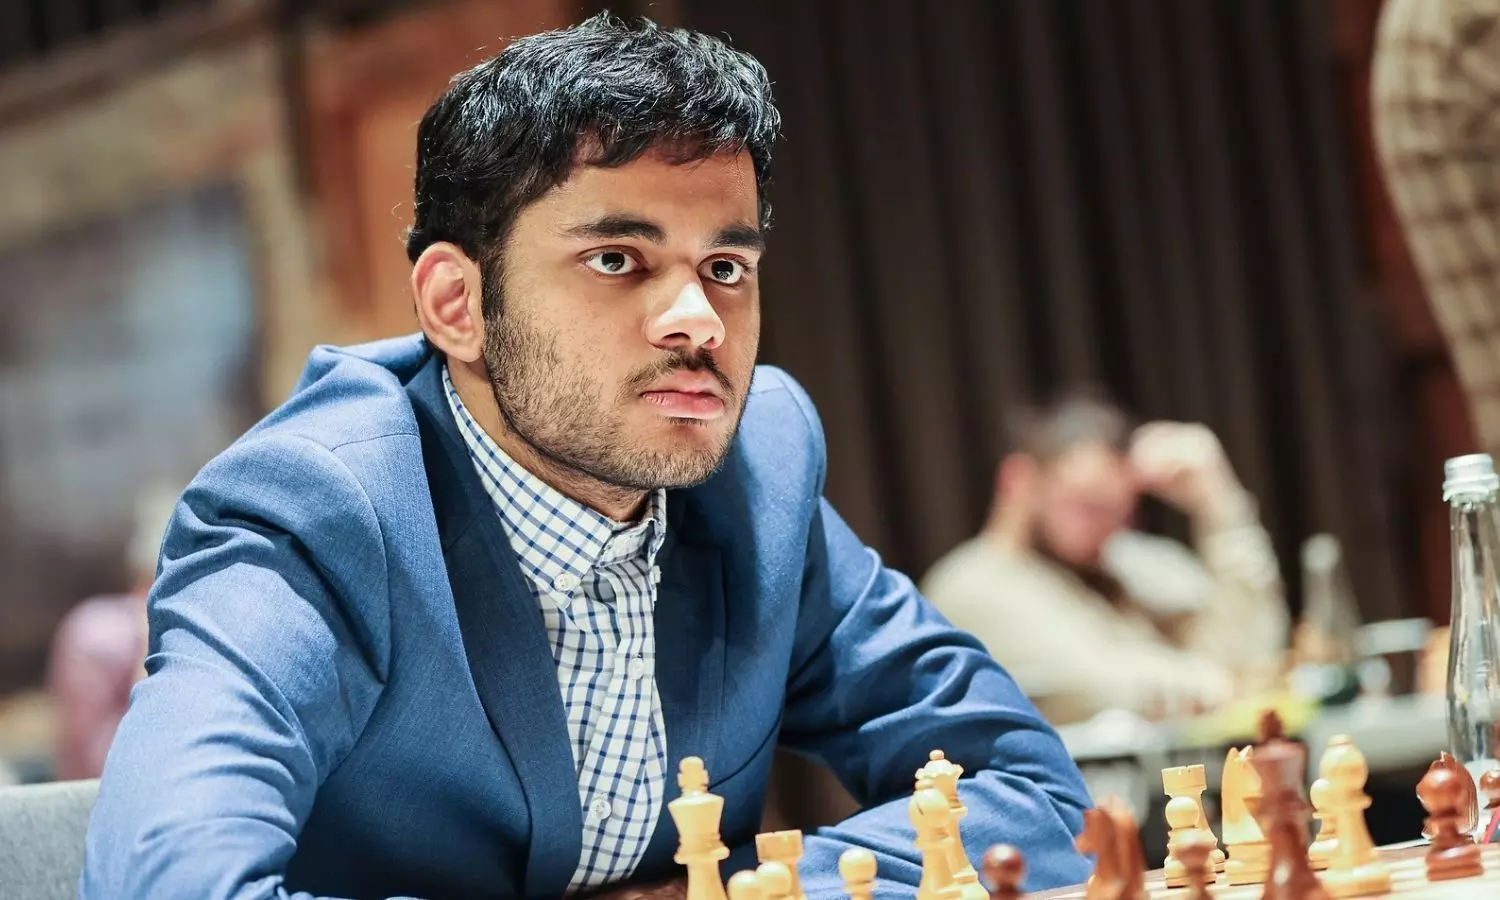 GM Arjun Erigaisi finished 3rd at the Lindores Abbey Blitz held in